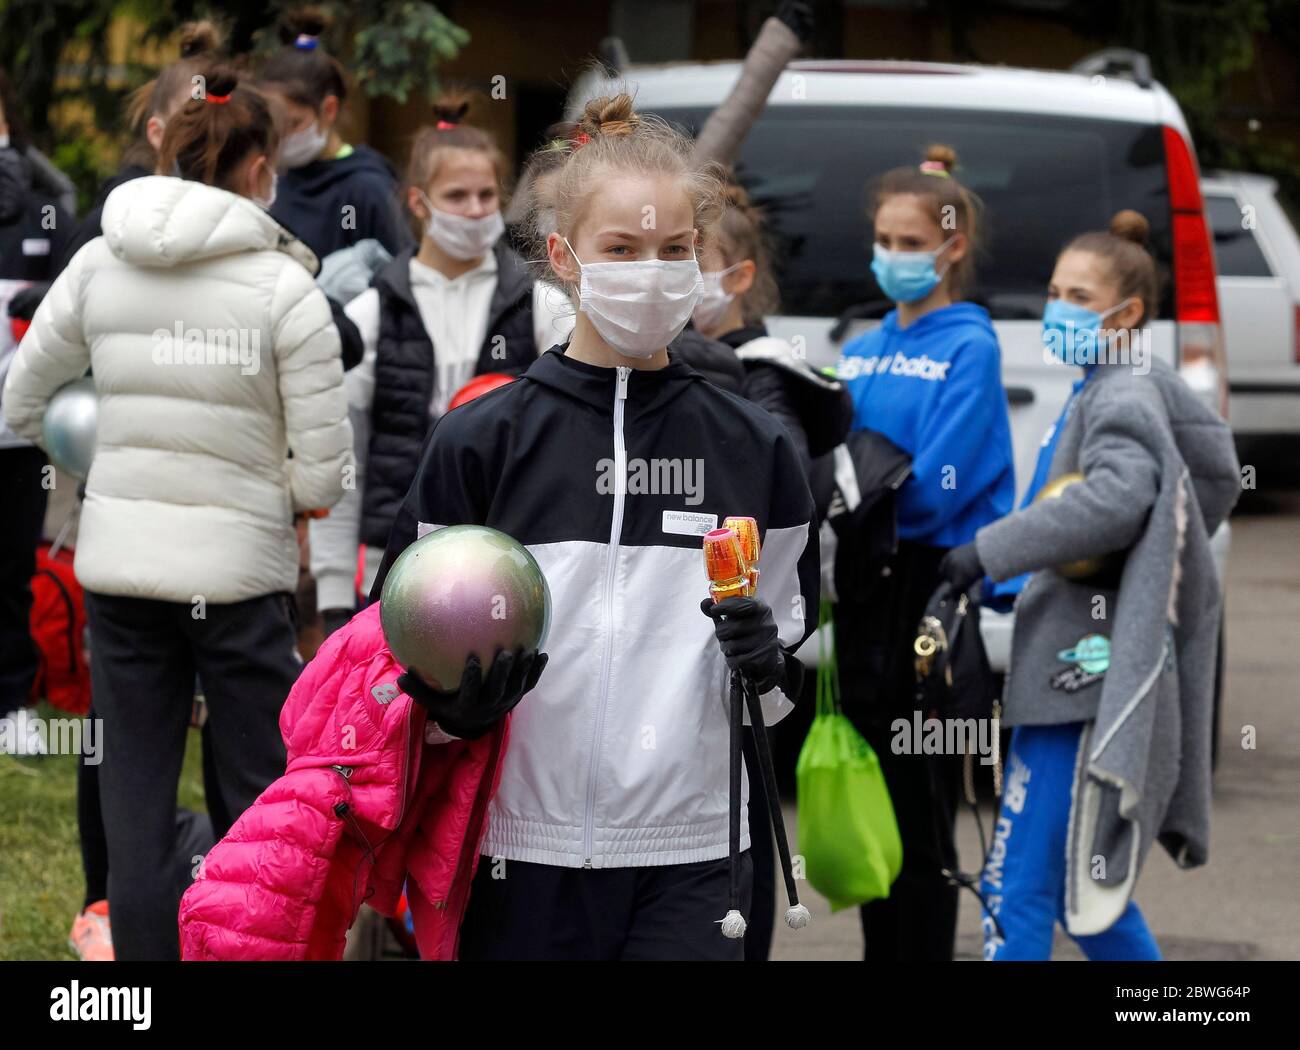 Gymnasts wearing face masks as a preventive measure against the spread of COVID-19 coronavirus attend an open-air training session.Young gymnasts of Ukrainian Deriugina School staged an open-air training session to raise awareness on the situation of the Deriugina School with no building for training, because the rental agreement for the club's training facility expired. The Deriugina School is known rhythmic gymnastics club by the former world champion Irina Deriugina, her coach and mom Albina Deriugina. Irina Deriugina is a former Soviet individual rhythmic gymnast from Ukraine and Ukrainian Stock Photo